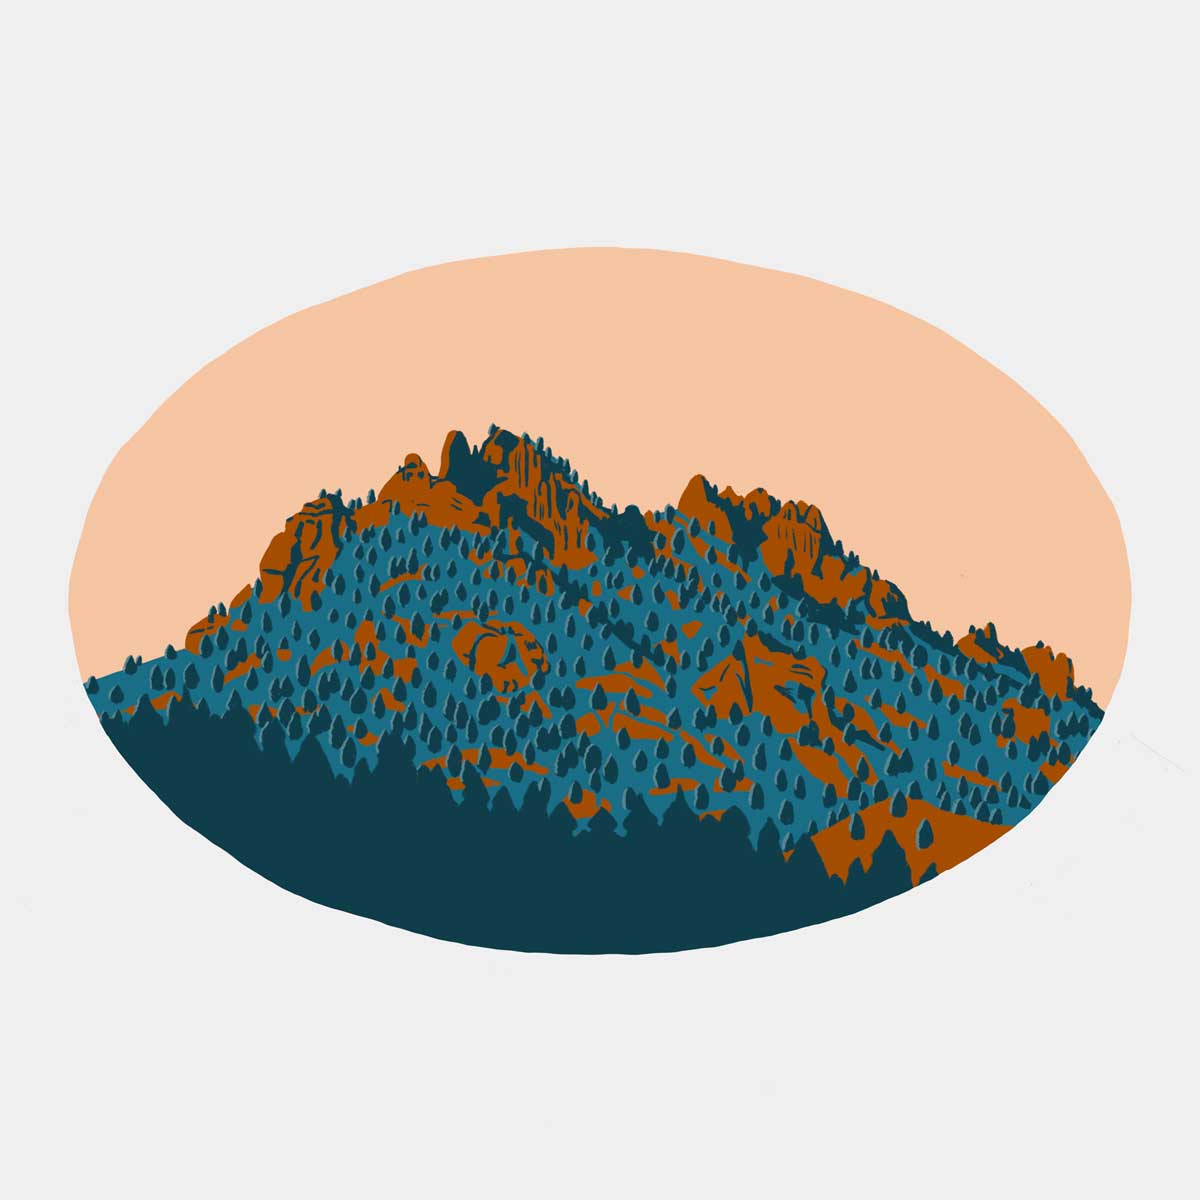 An illustration of Long Scraggy Peak in Colorado done in a bright, graphic style with orange and teal